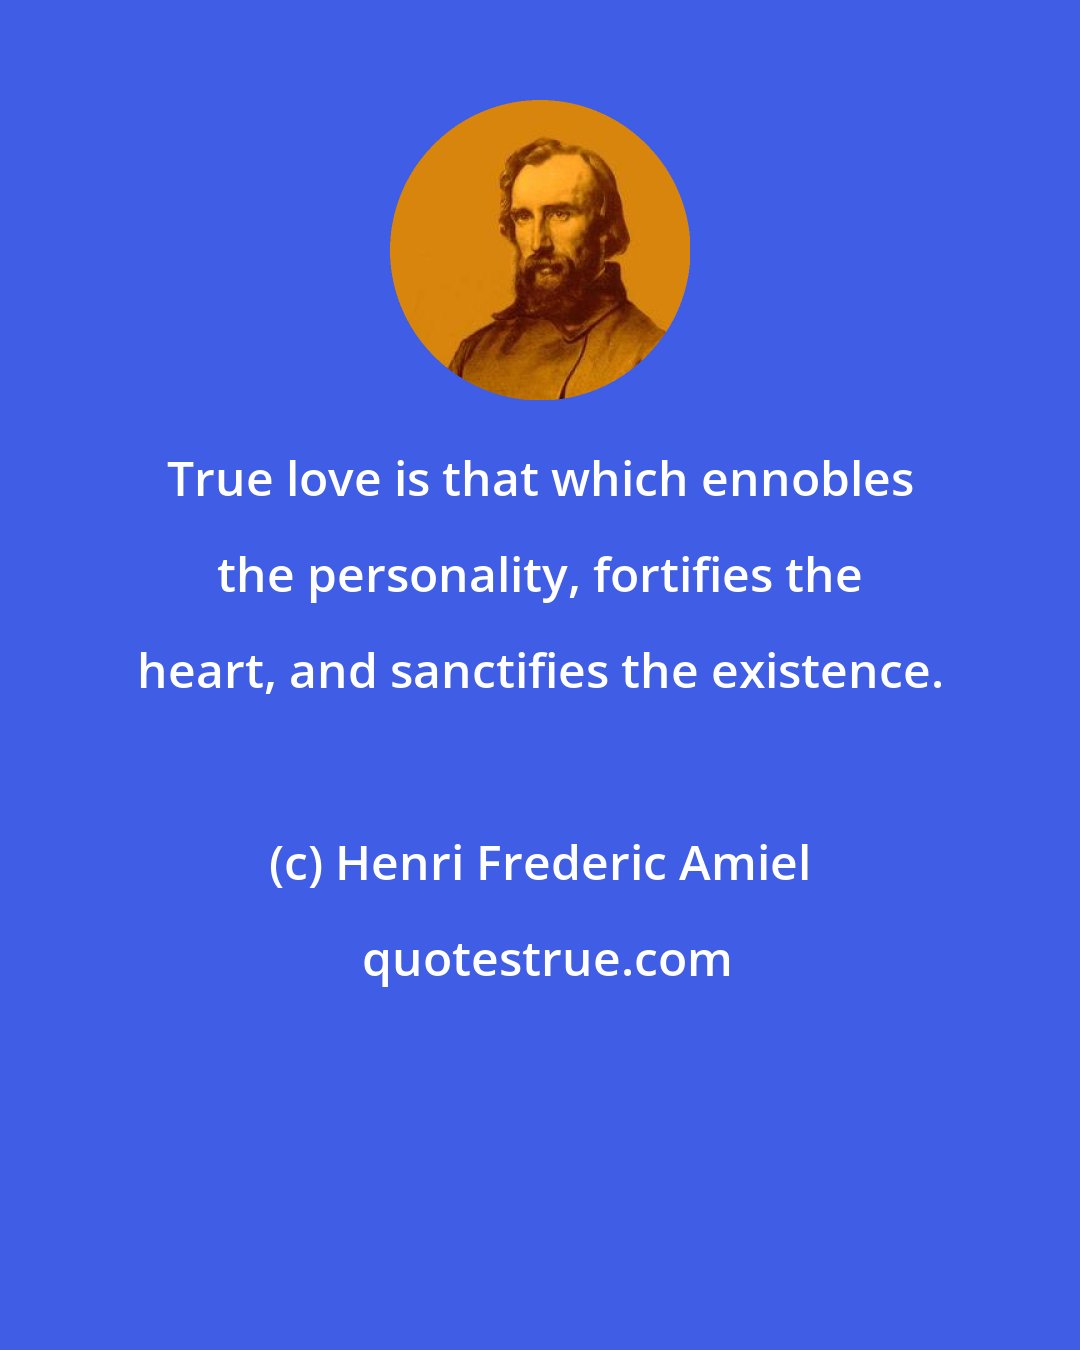 Henri Frederic Amiel: True love is that which ennobles the personality, fortifies the heart, and sanctifies the existence.